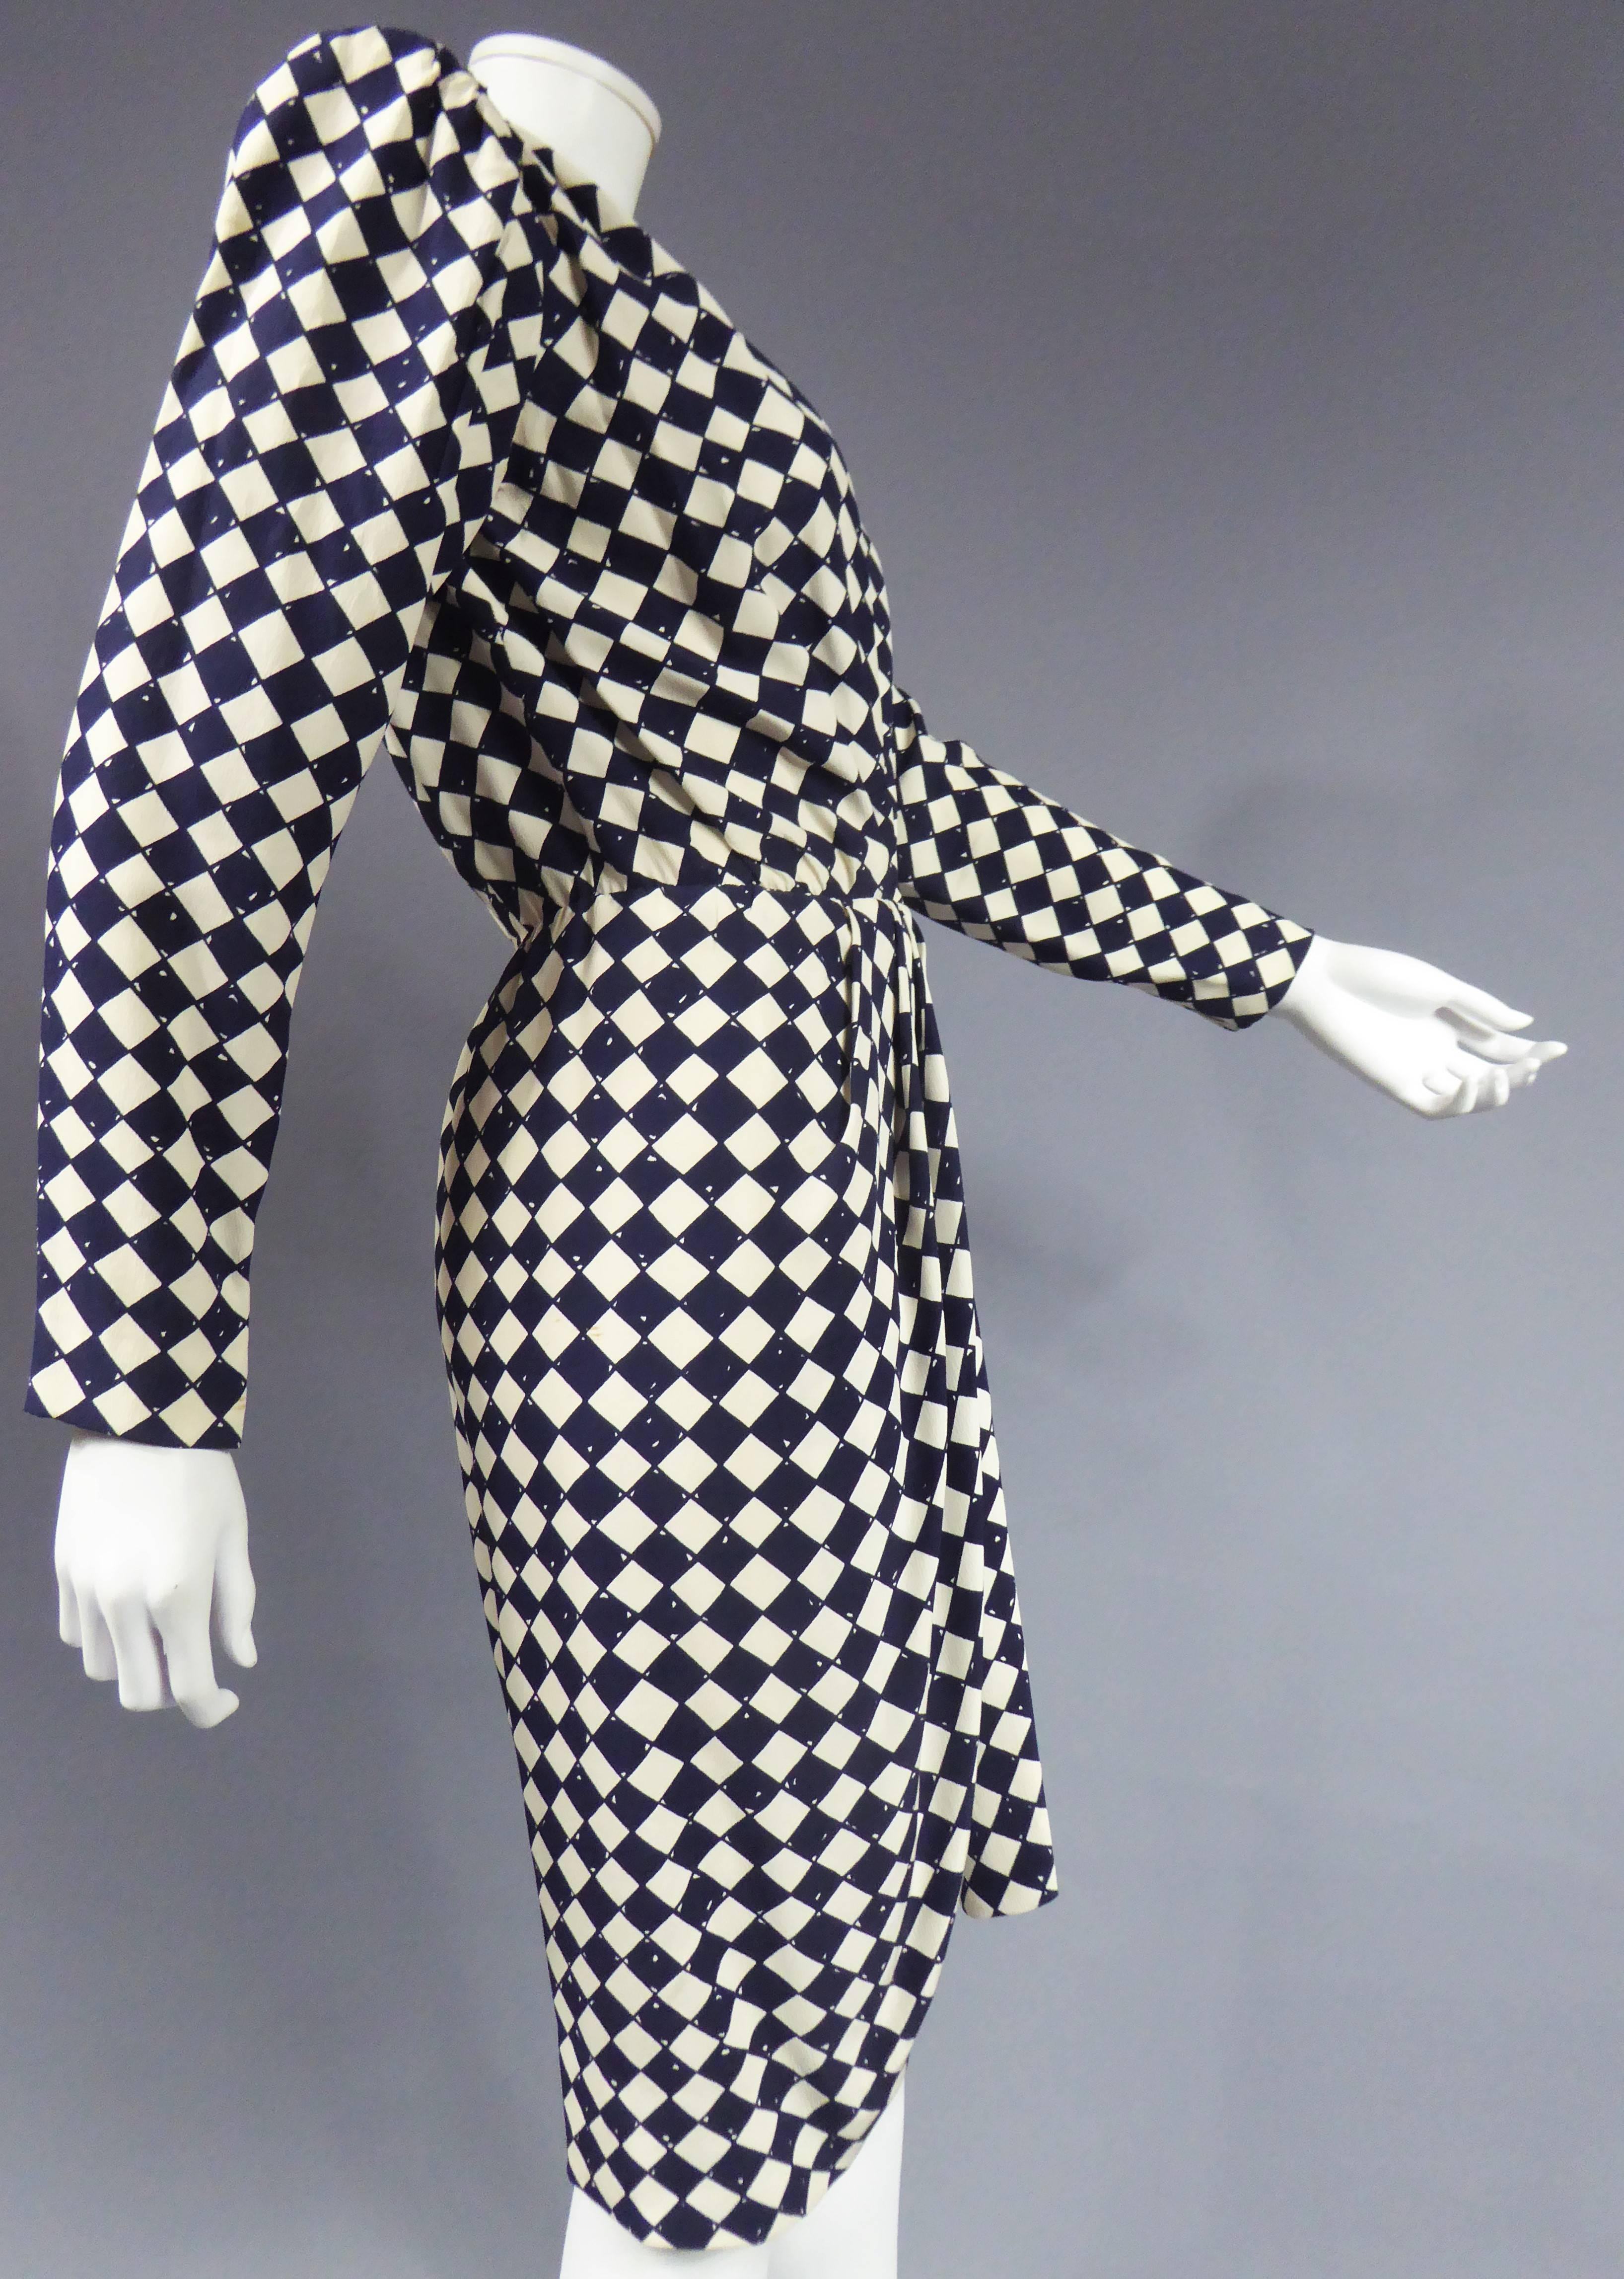 Hubert de Givenchy Haute Couture Numbered 77304 1